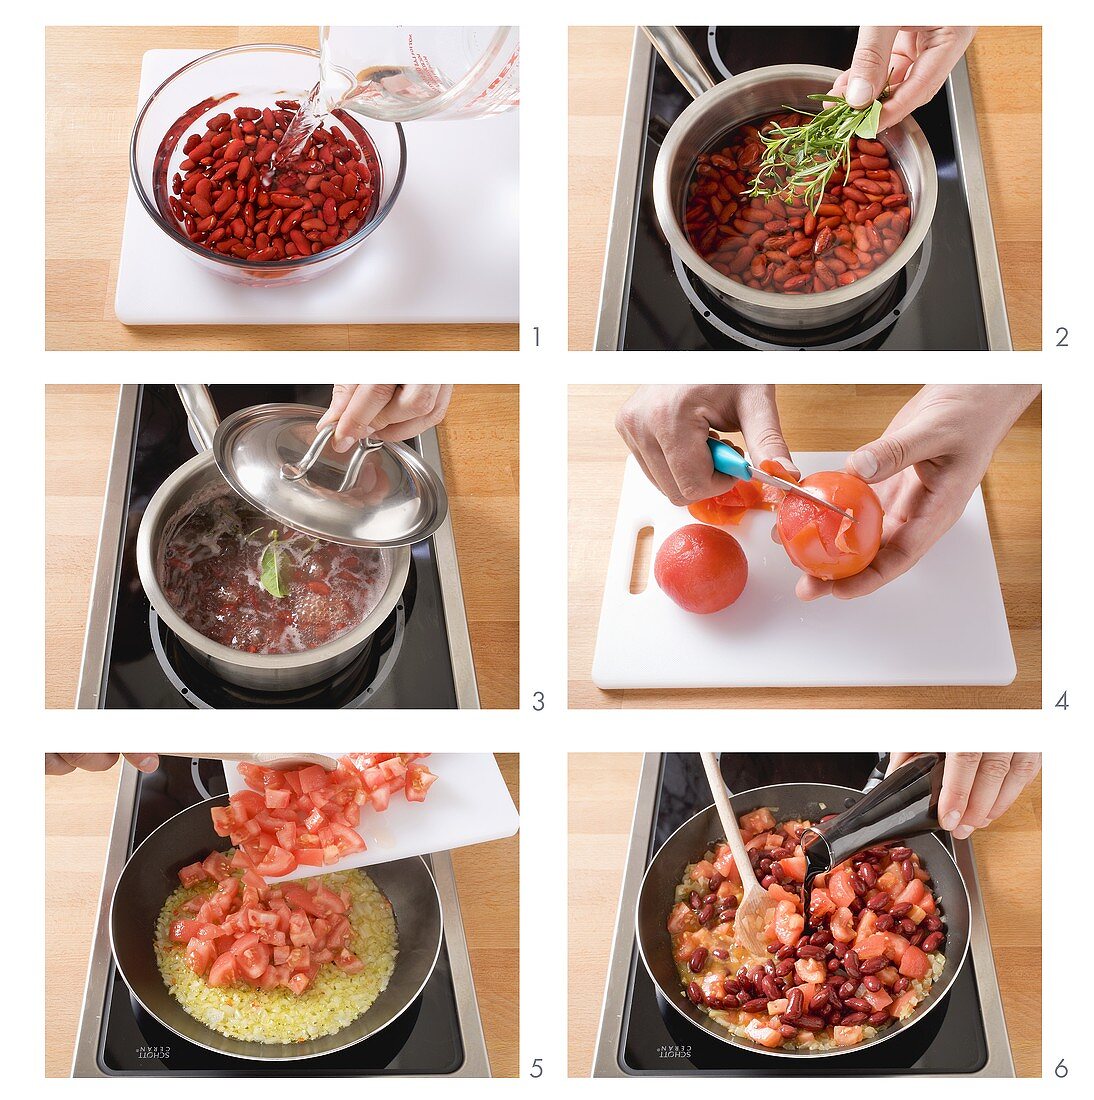 Making red beans in chilli tomato sauce